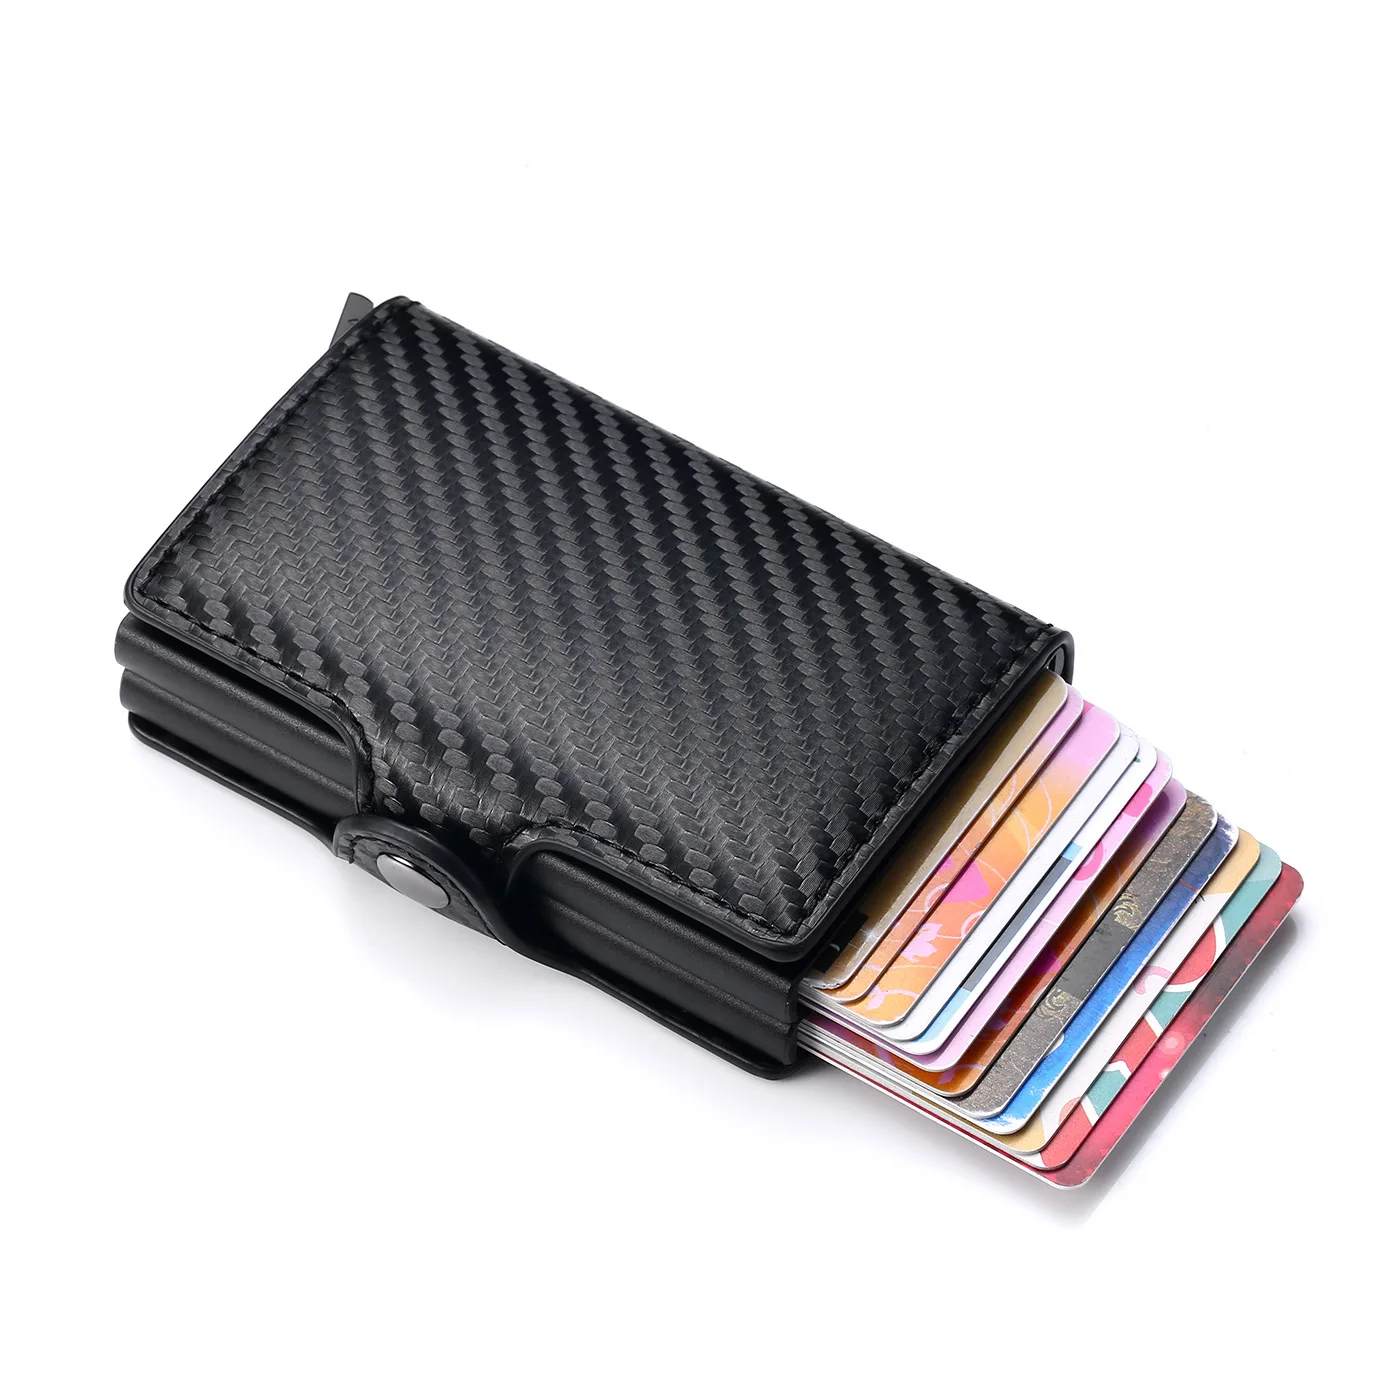 

RFID Blocking Carbon Fiber PU Leather Slim Wallet Customize Double Aluminum Credit Card Holder, Black, red, coffee, apricot, blue, grey